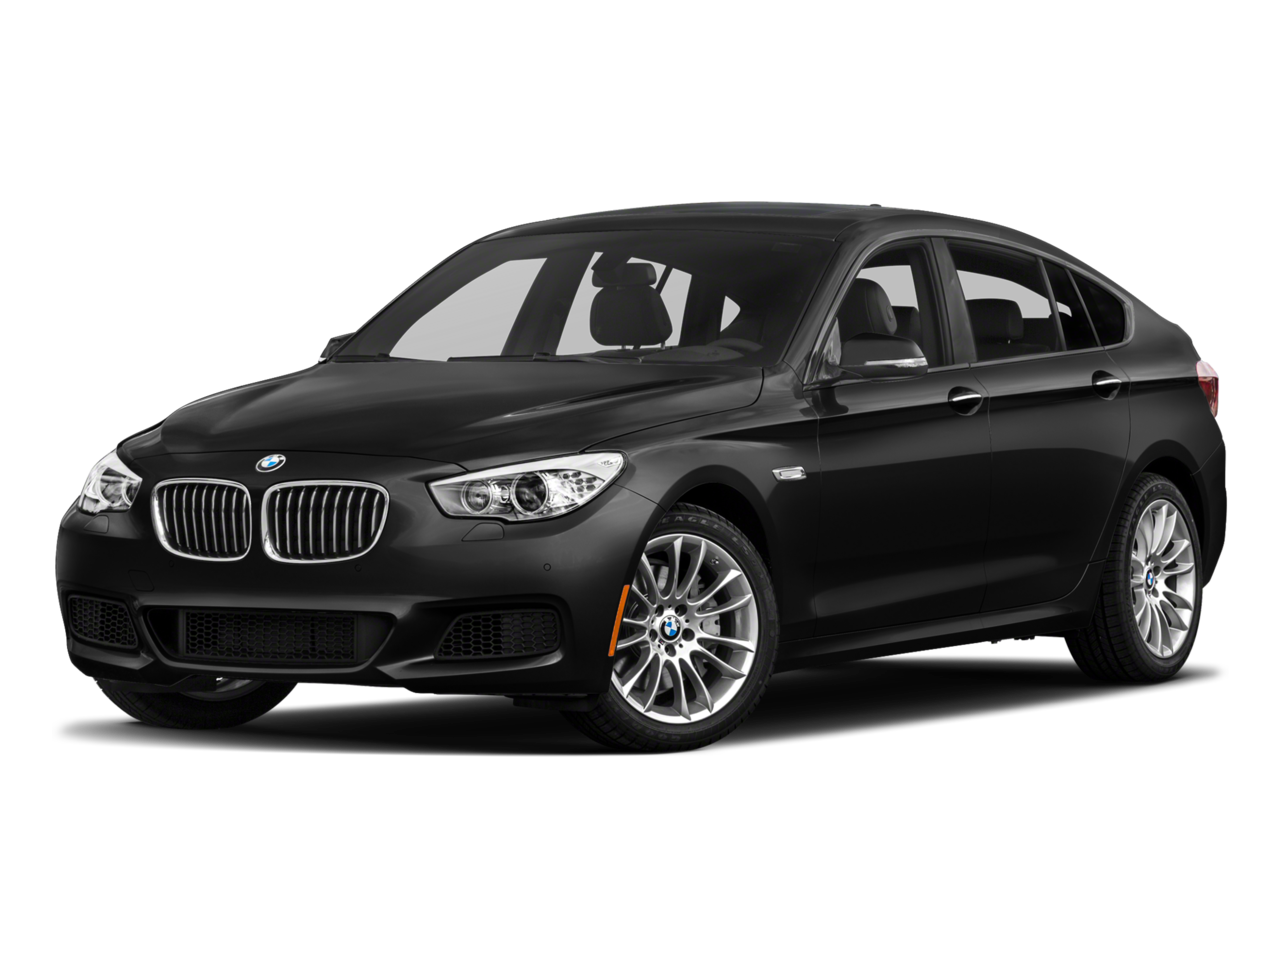  BMW 535I-Gt oem parts and accessories on sale